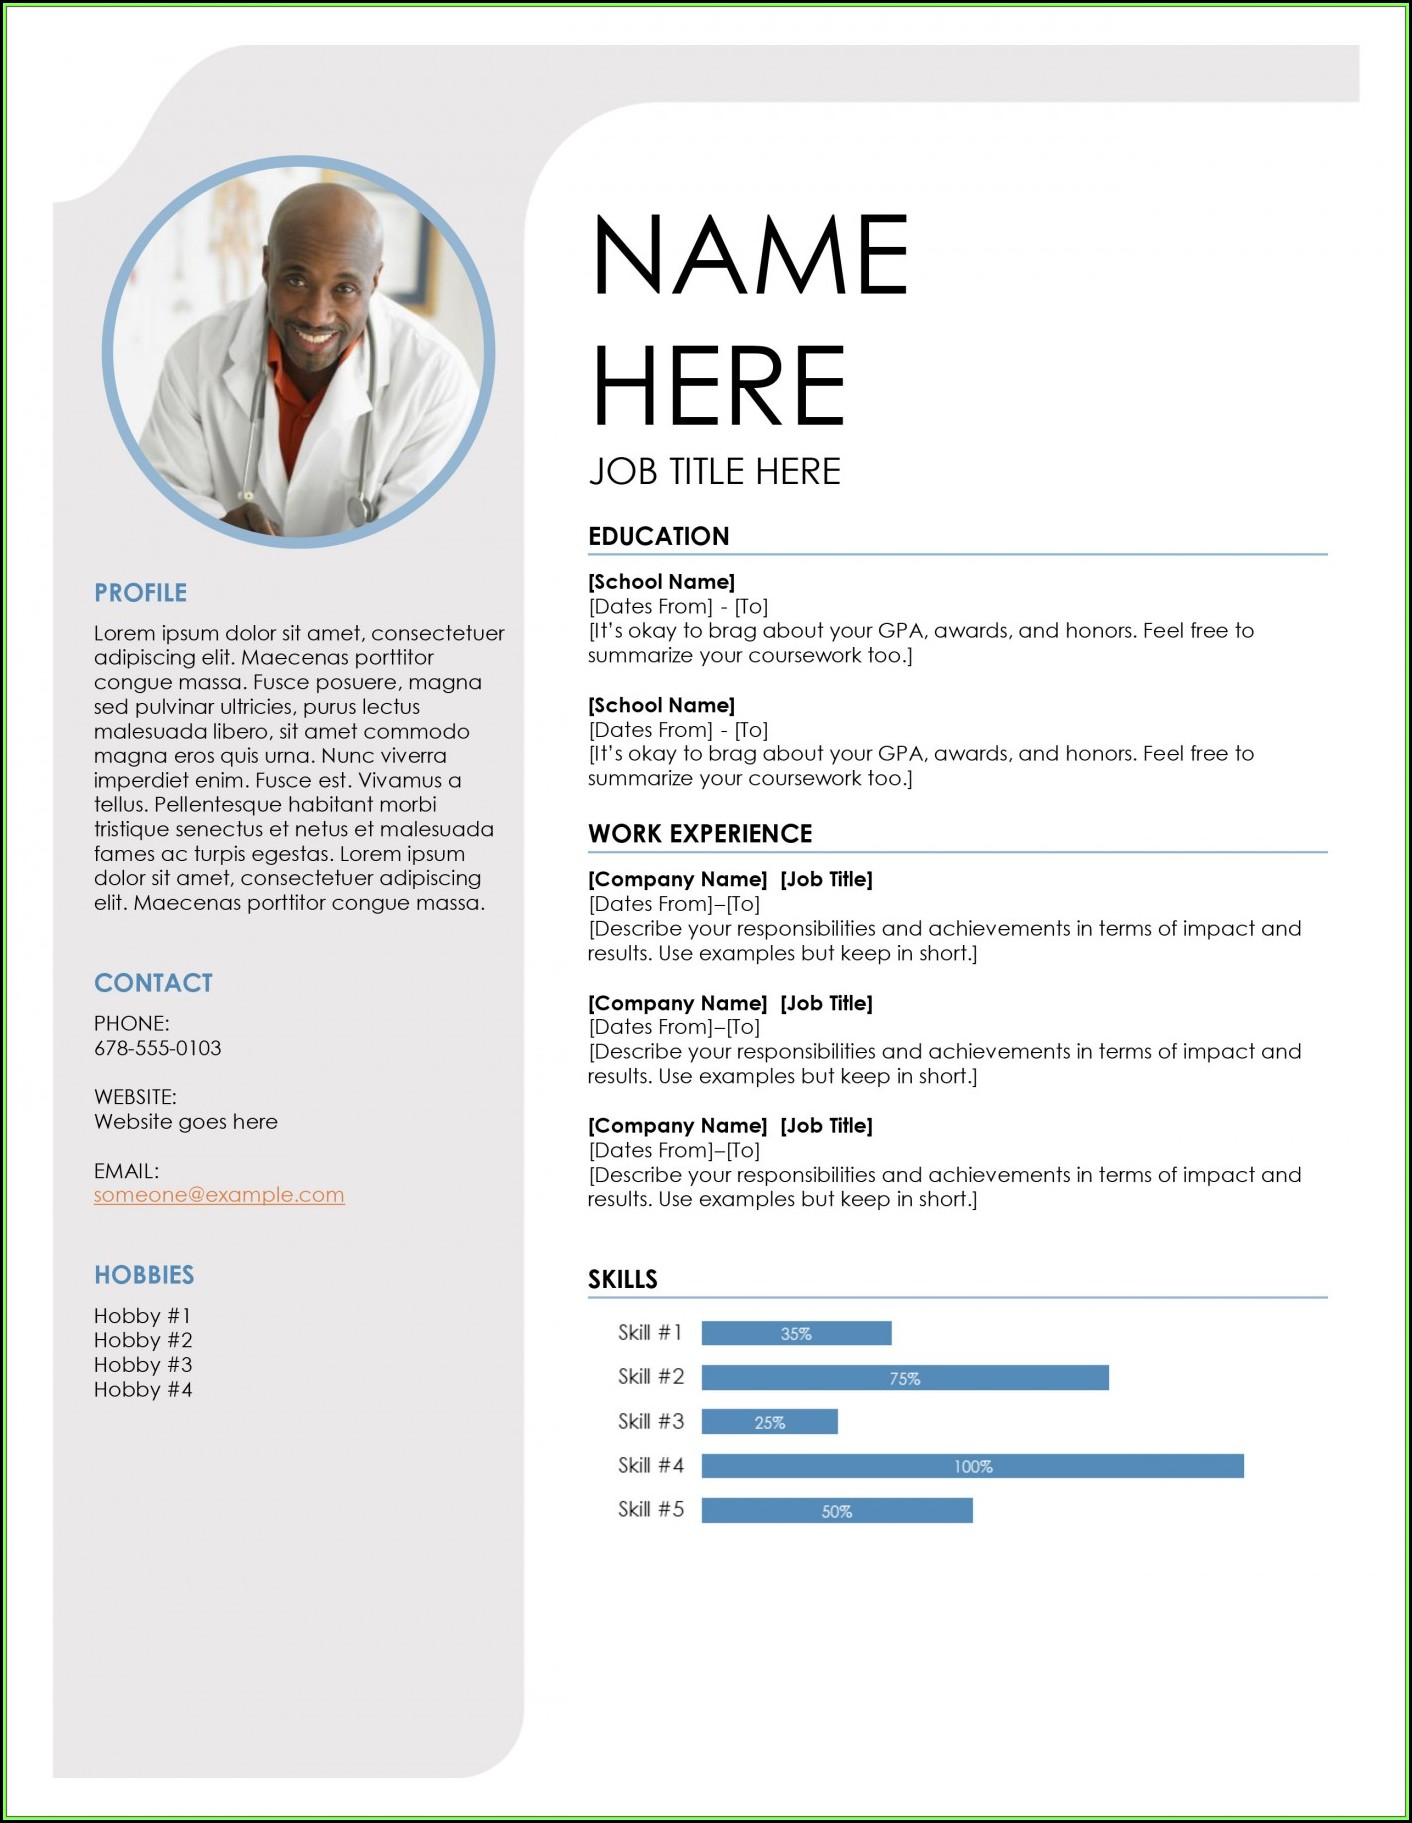 free resume templates for microsoft word